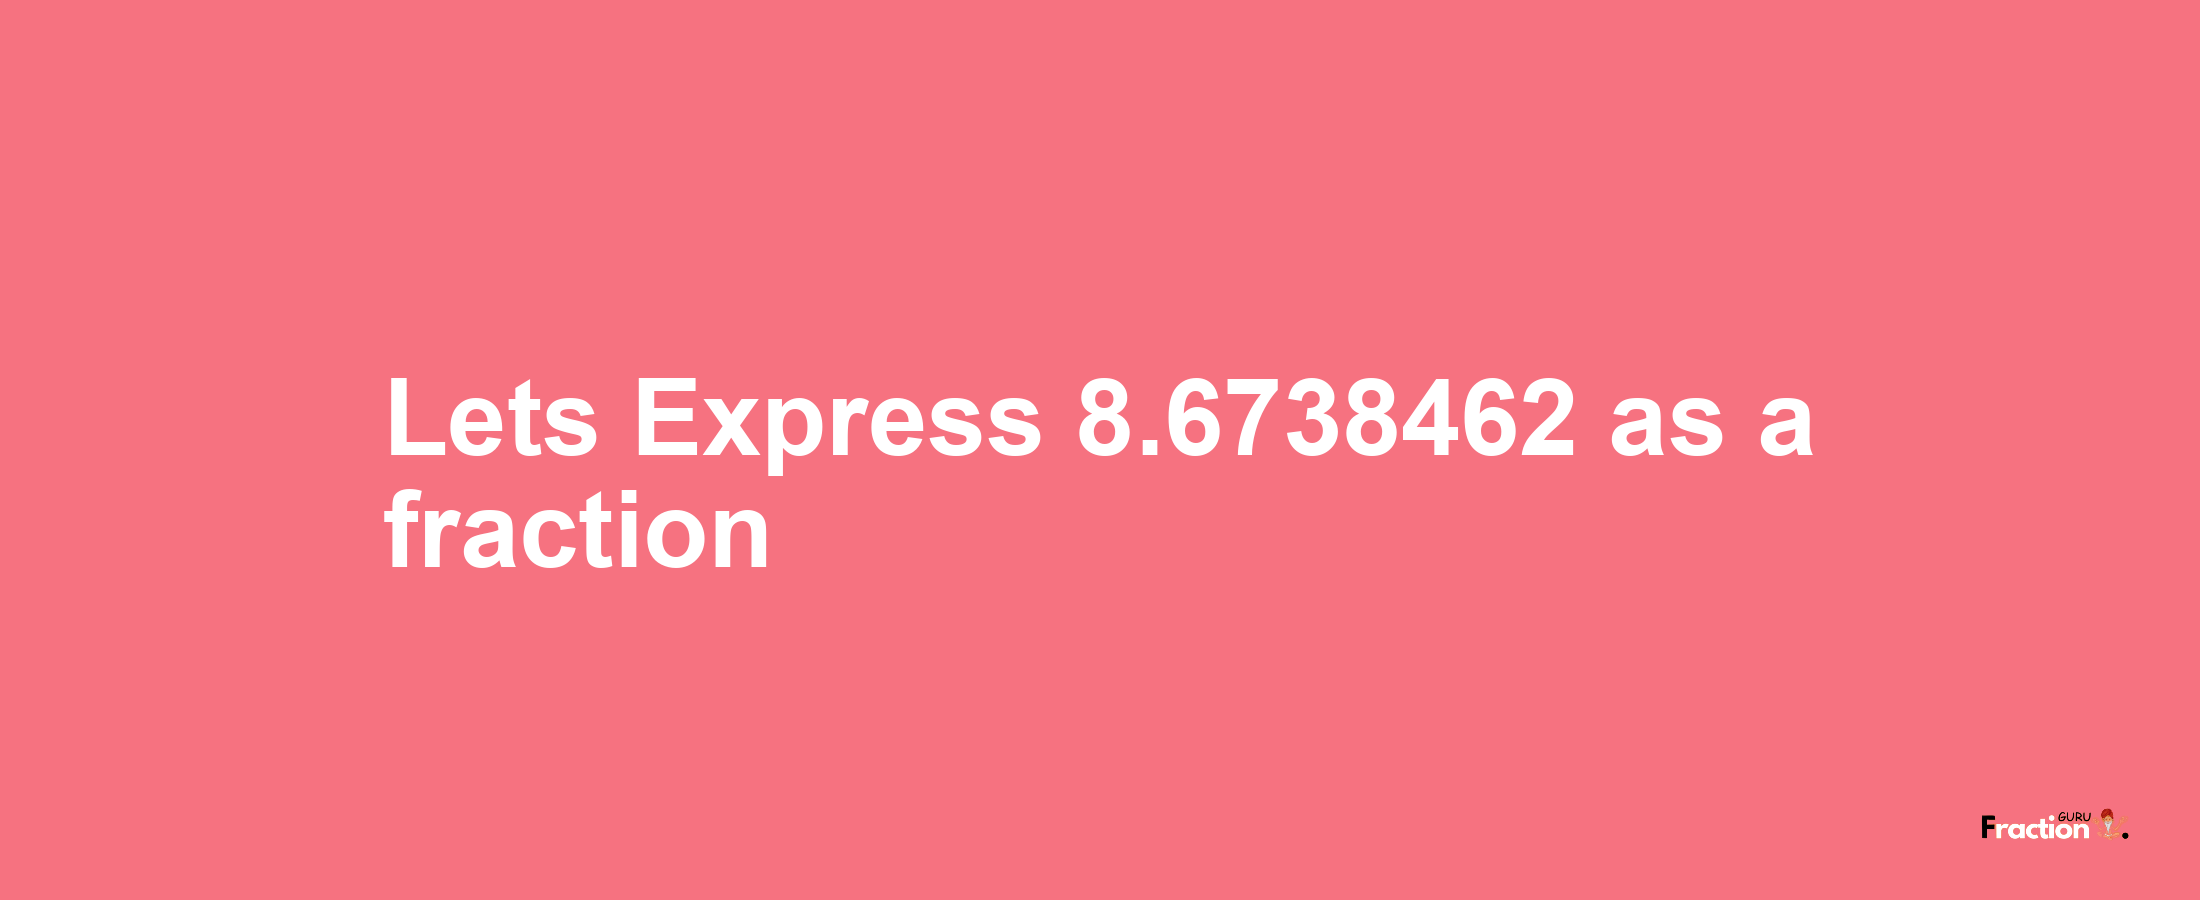 Lets Express 8.6738462 as afraction